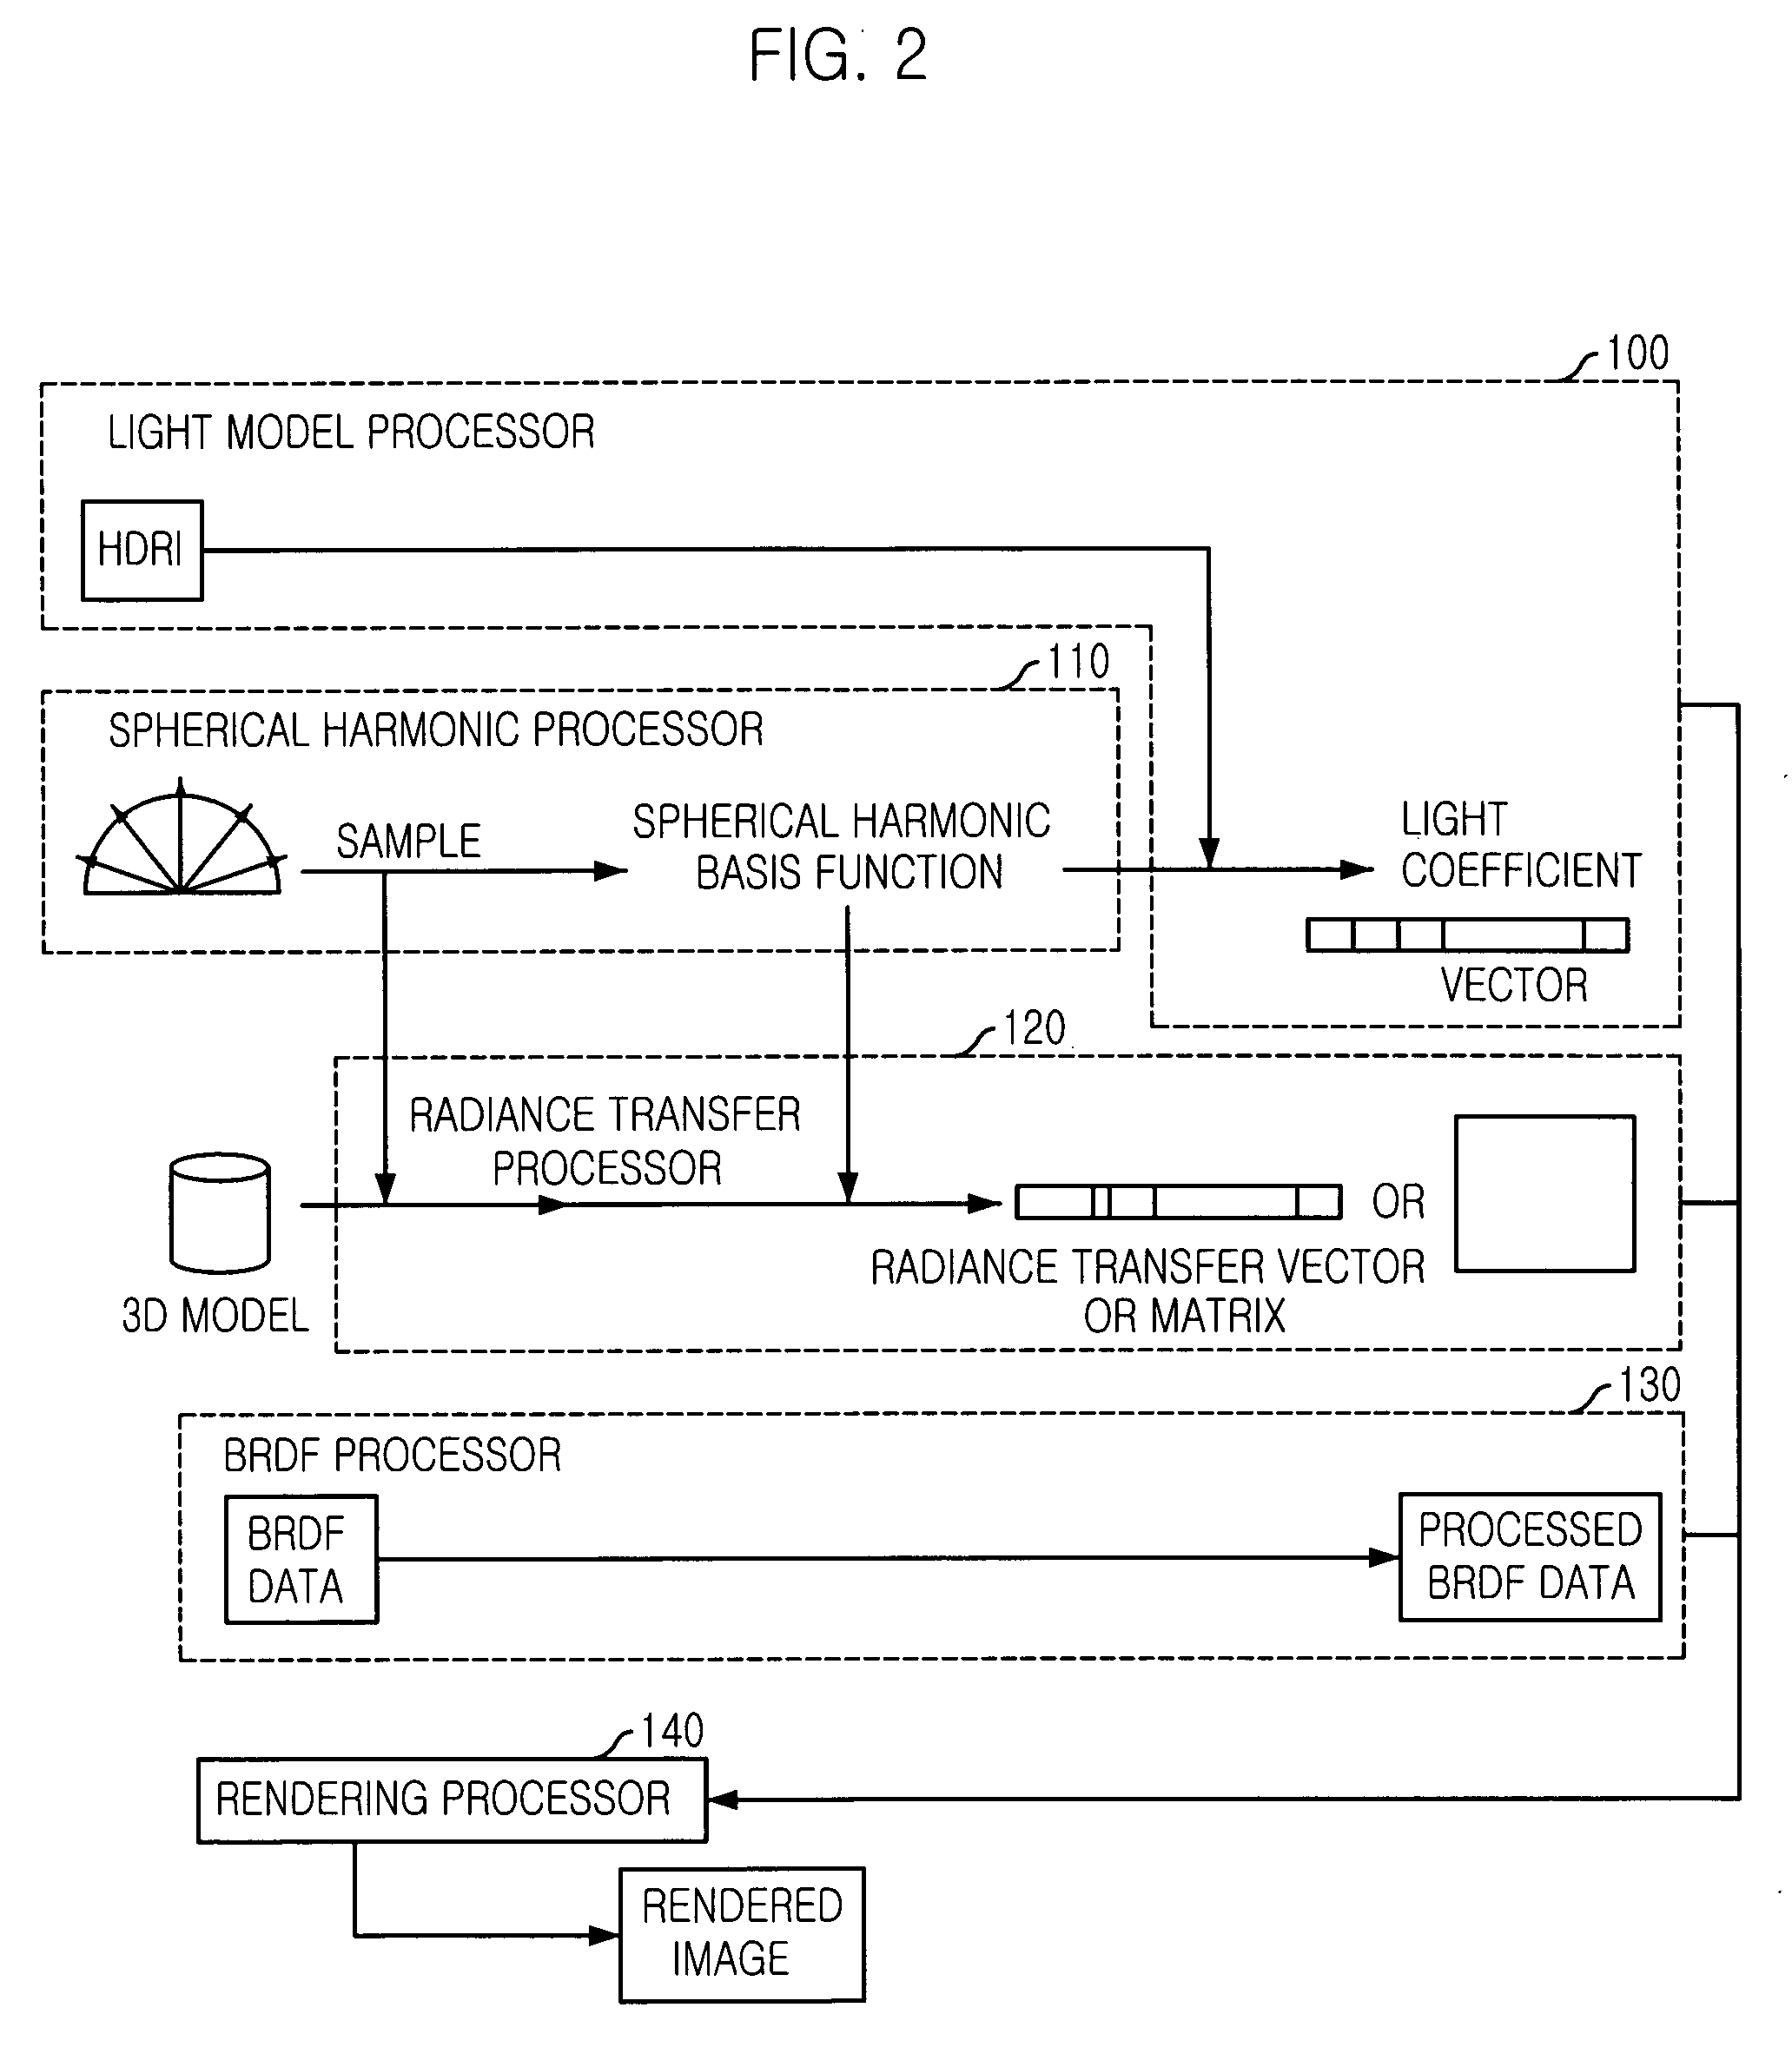 Rendering apparatus and method for real-time global illumination in real light environment